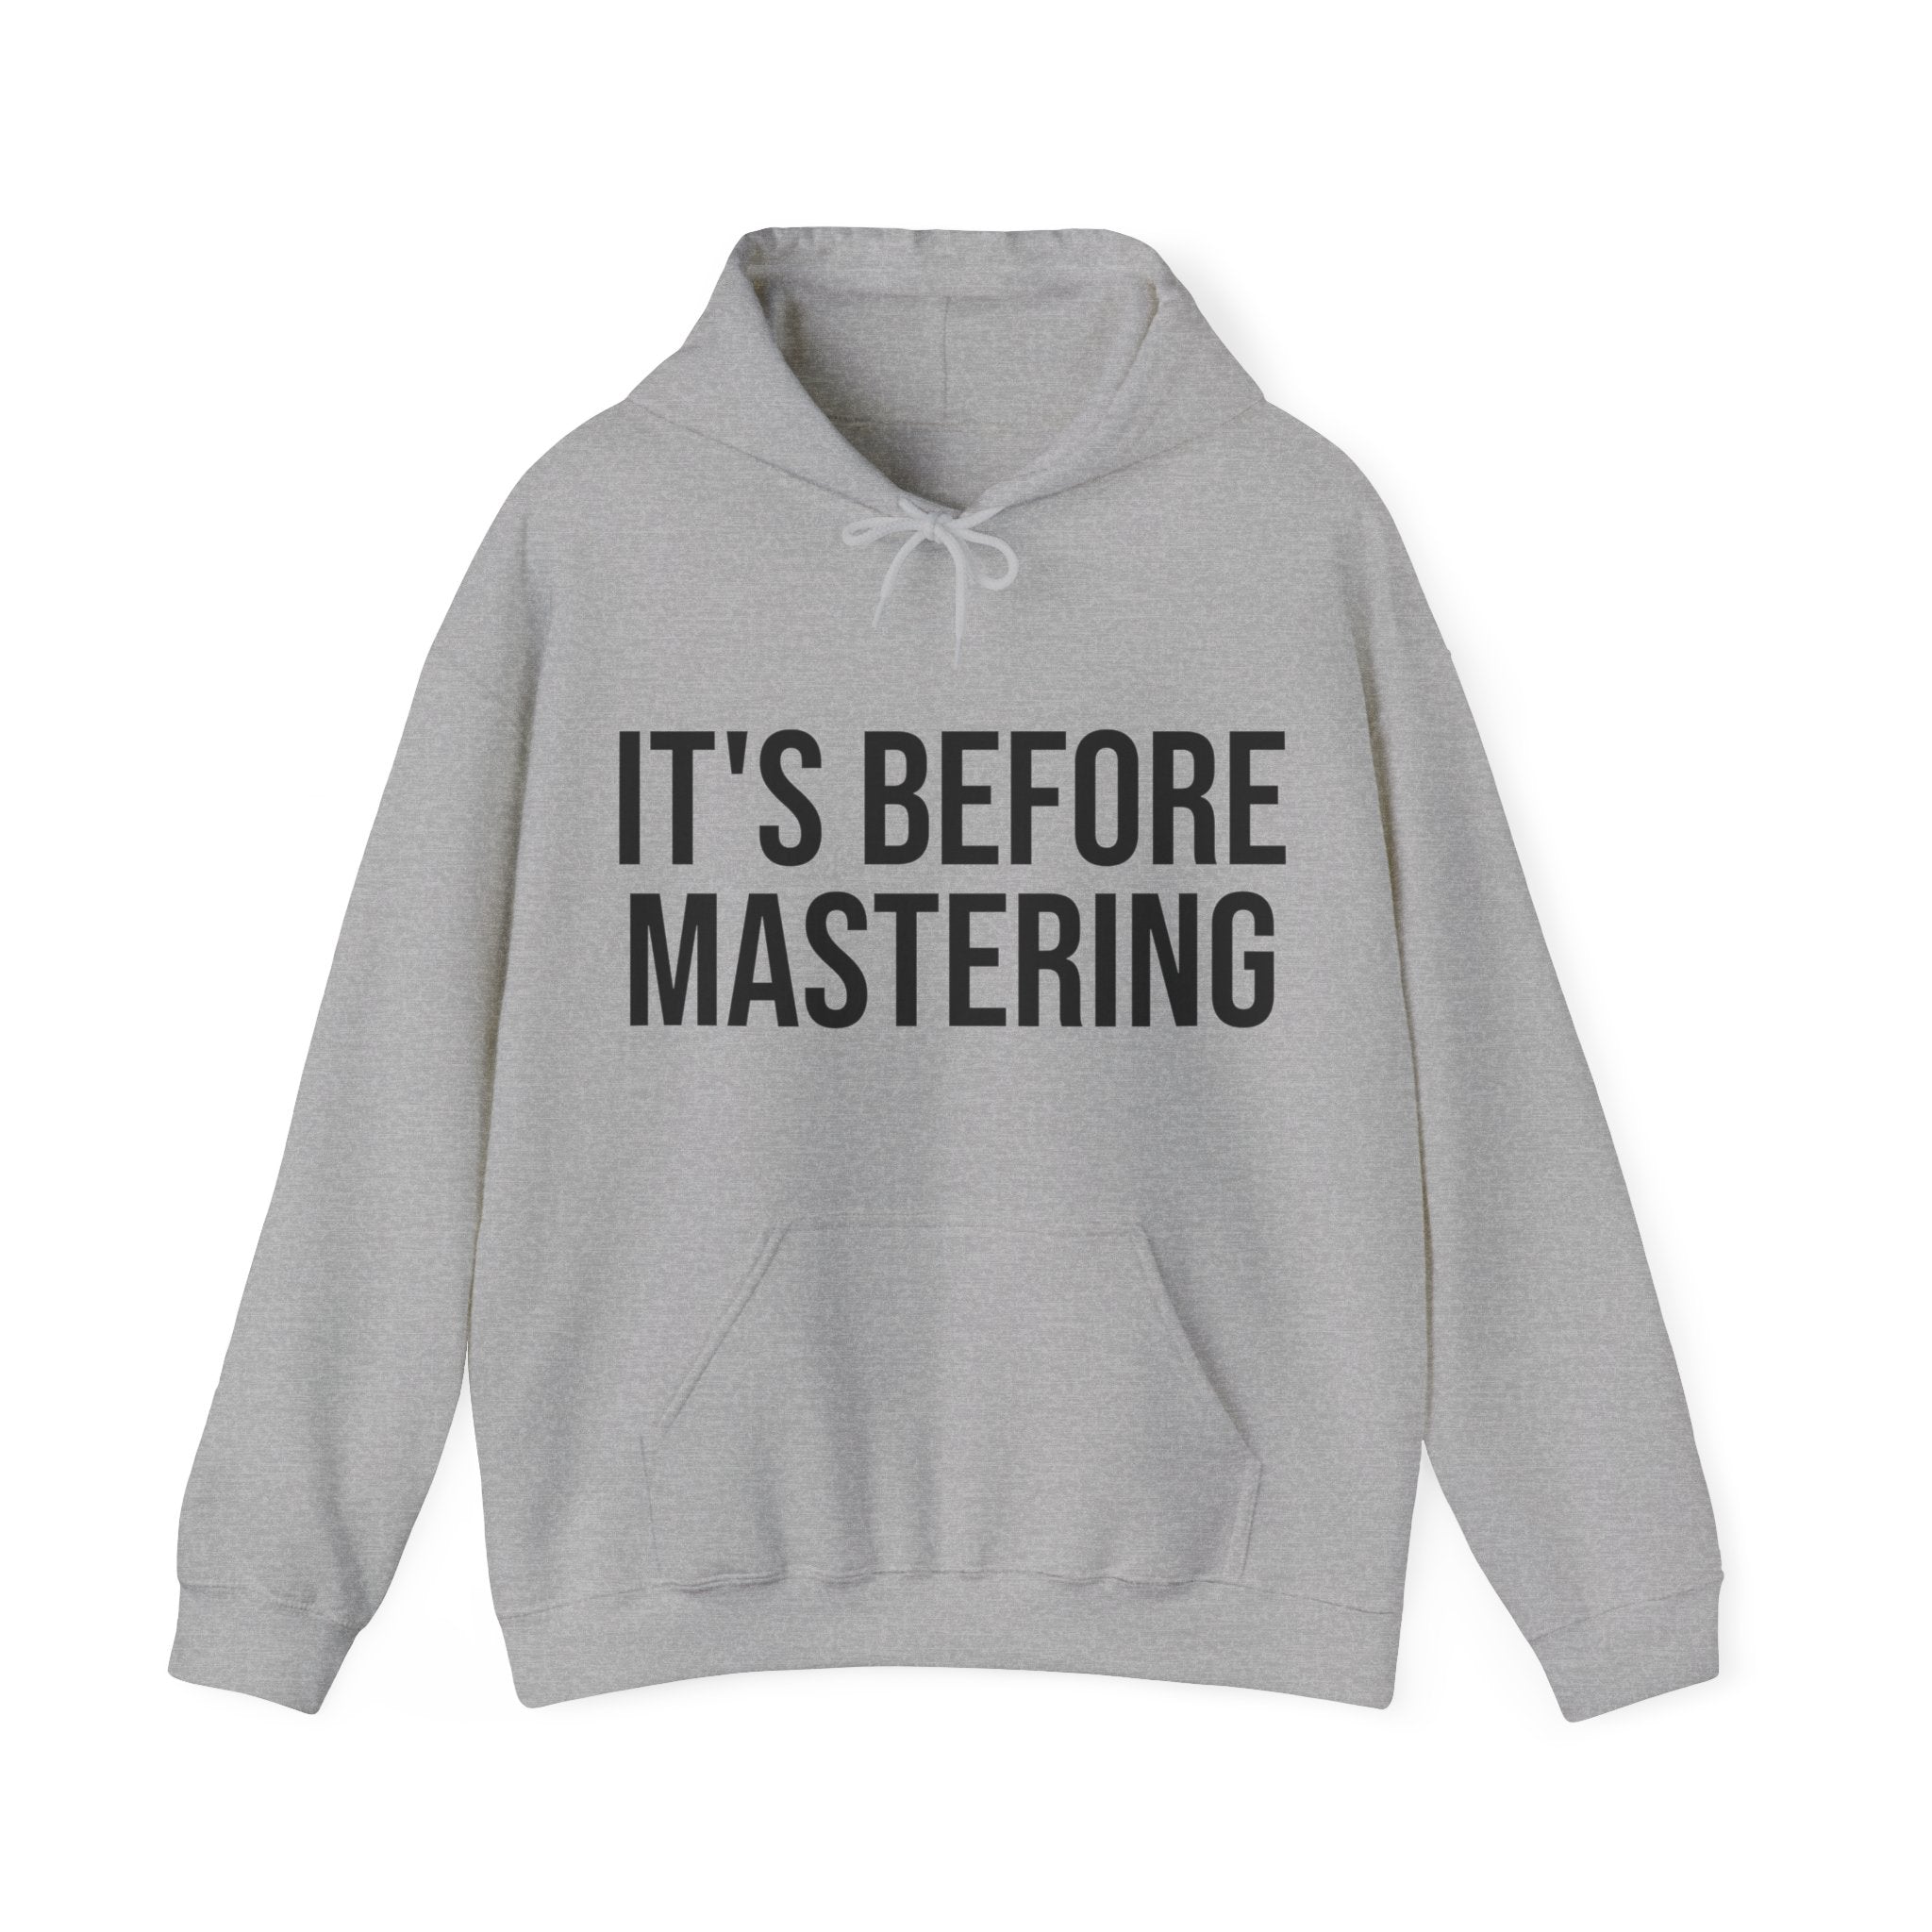 A heather grey hooded sweatshirt with a drawstring hood and a kangaroo pocket is laid out flat. Emblazoned across the chest in bold, block letters is the statement 'IT'S BEFORE MASTERING,' implying a stage in the audio production process before a track is fully produced. The typography and message resonate with music producers and audio engineers who appreciate the steps of music creation